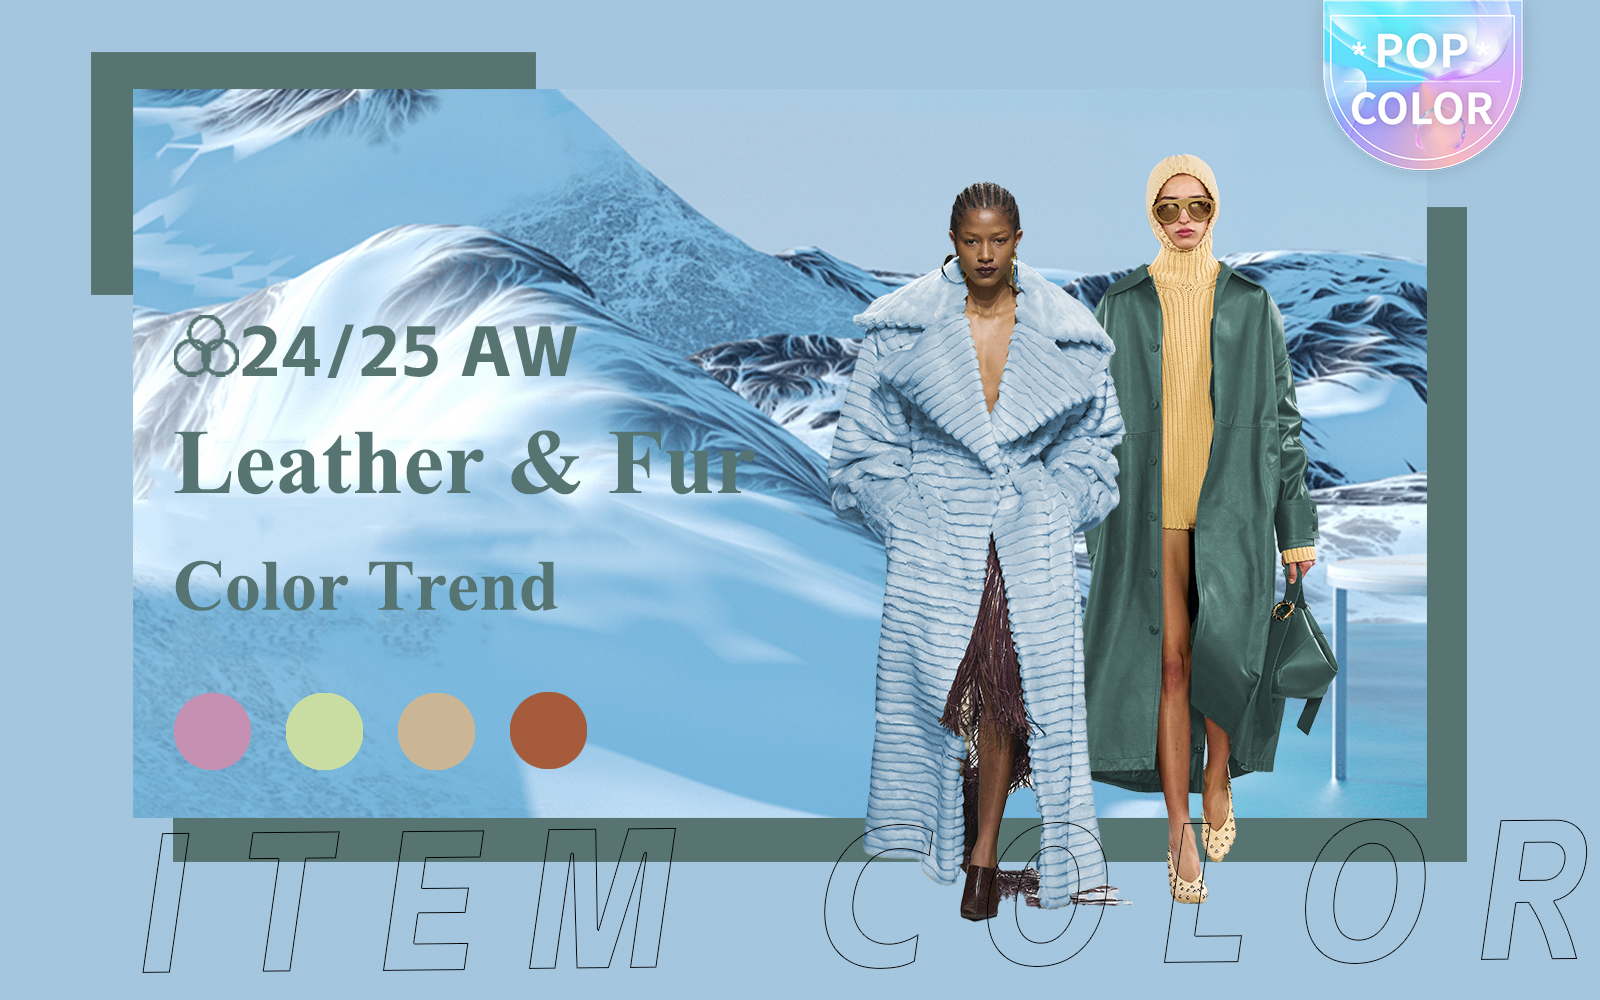 Natural Palette -- The Color Trend for Women's Leather & Fur